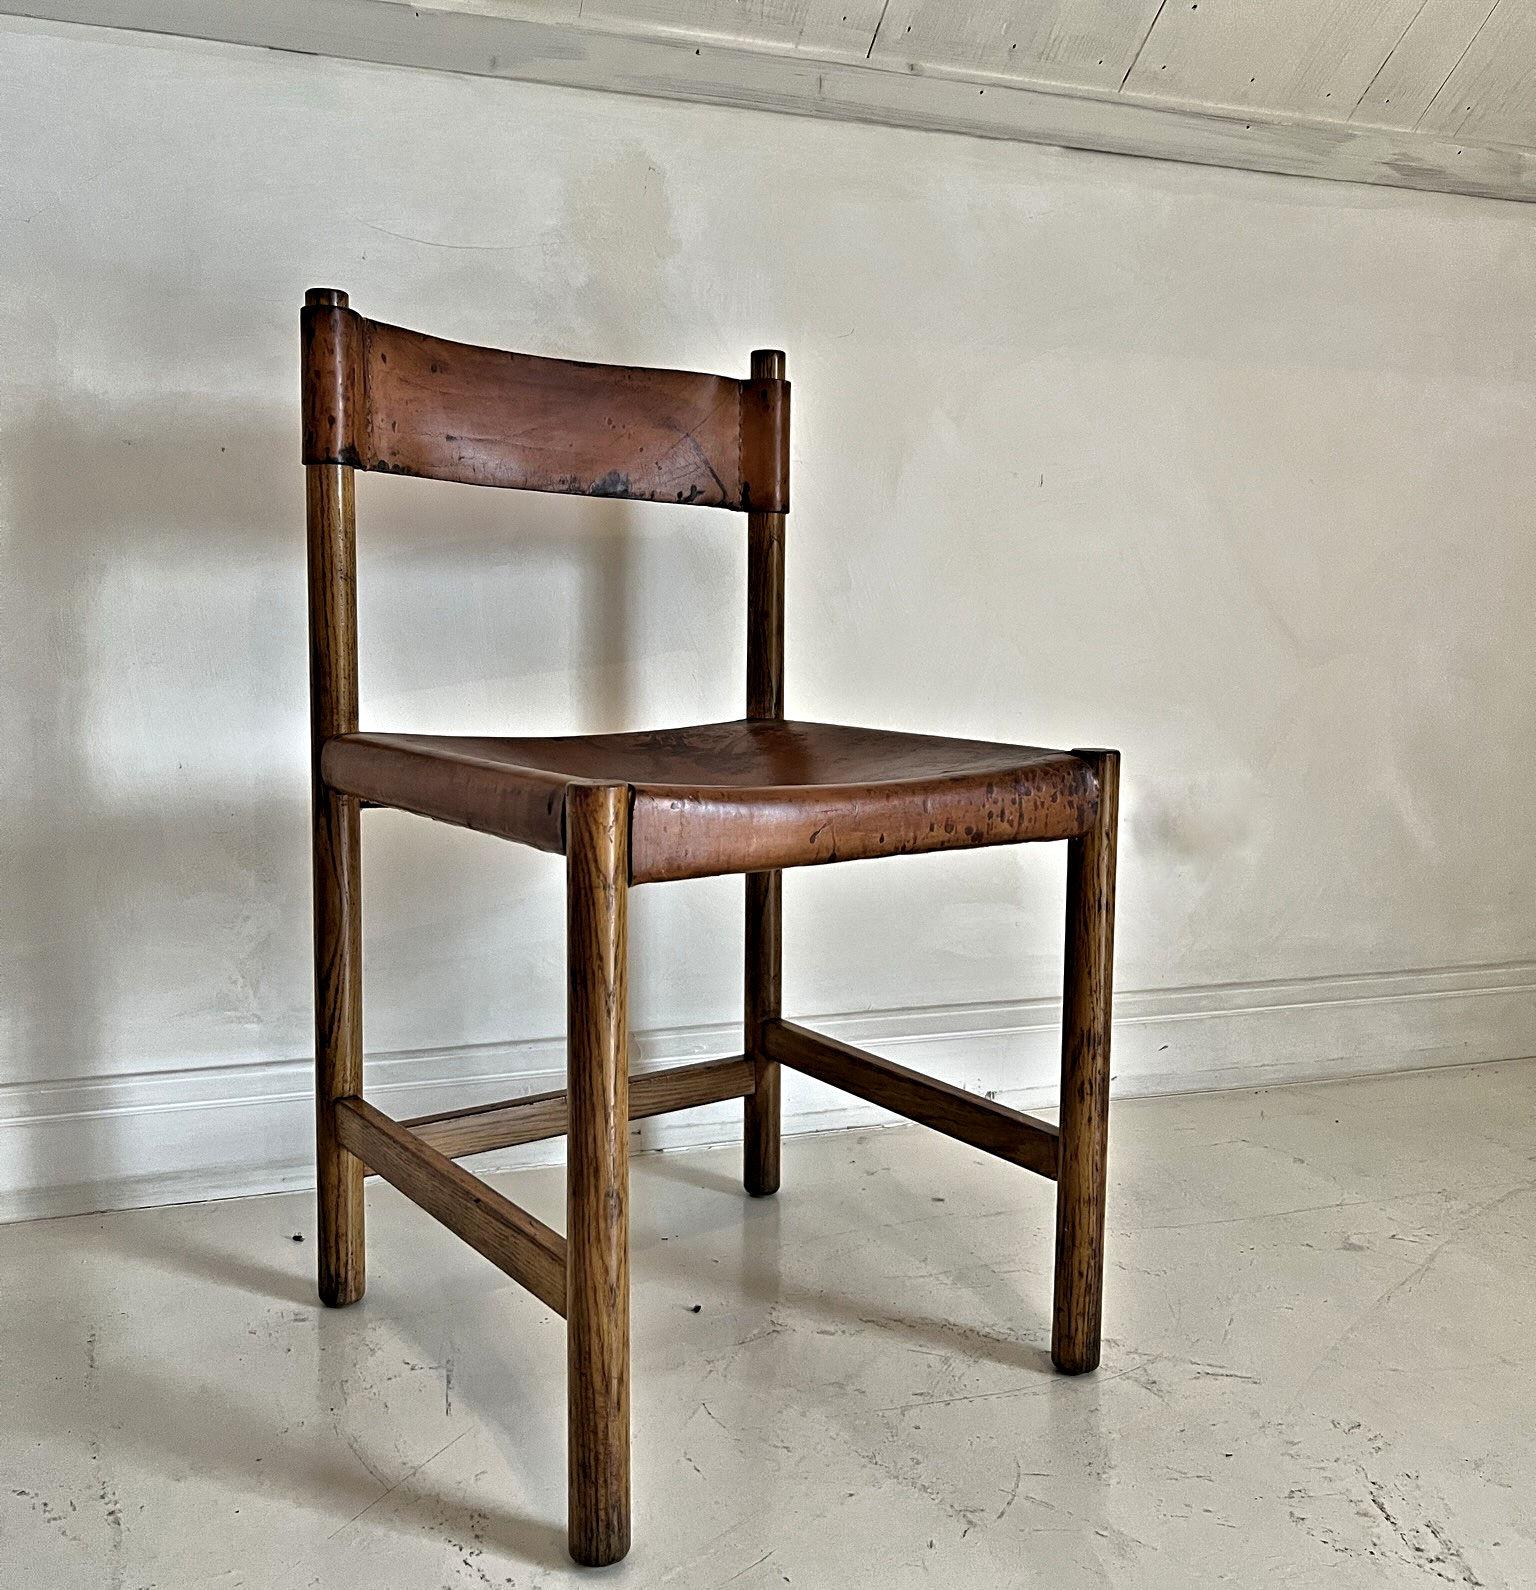 A honest laether and softwood chair by Spanish mid-century designer Jordi Villanova. Nice patina overall. Sturdy and ready to use.